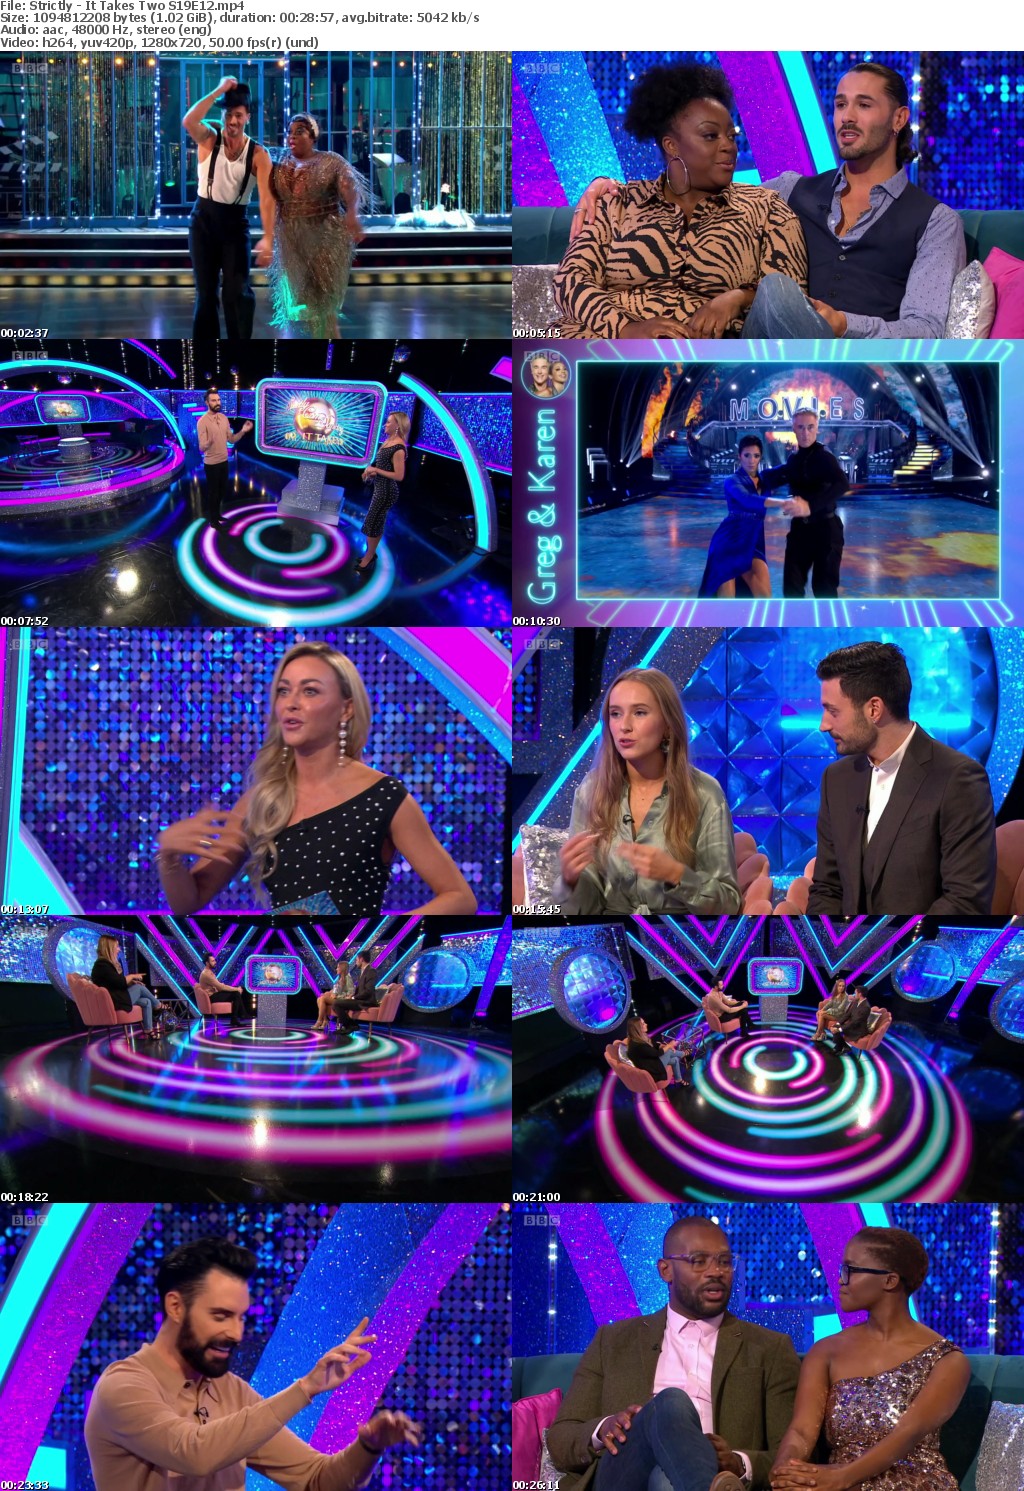 Strictly - It Takes Two S19E12 (1280x720p HD, 50fps, soft Eng subs)